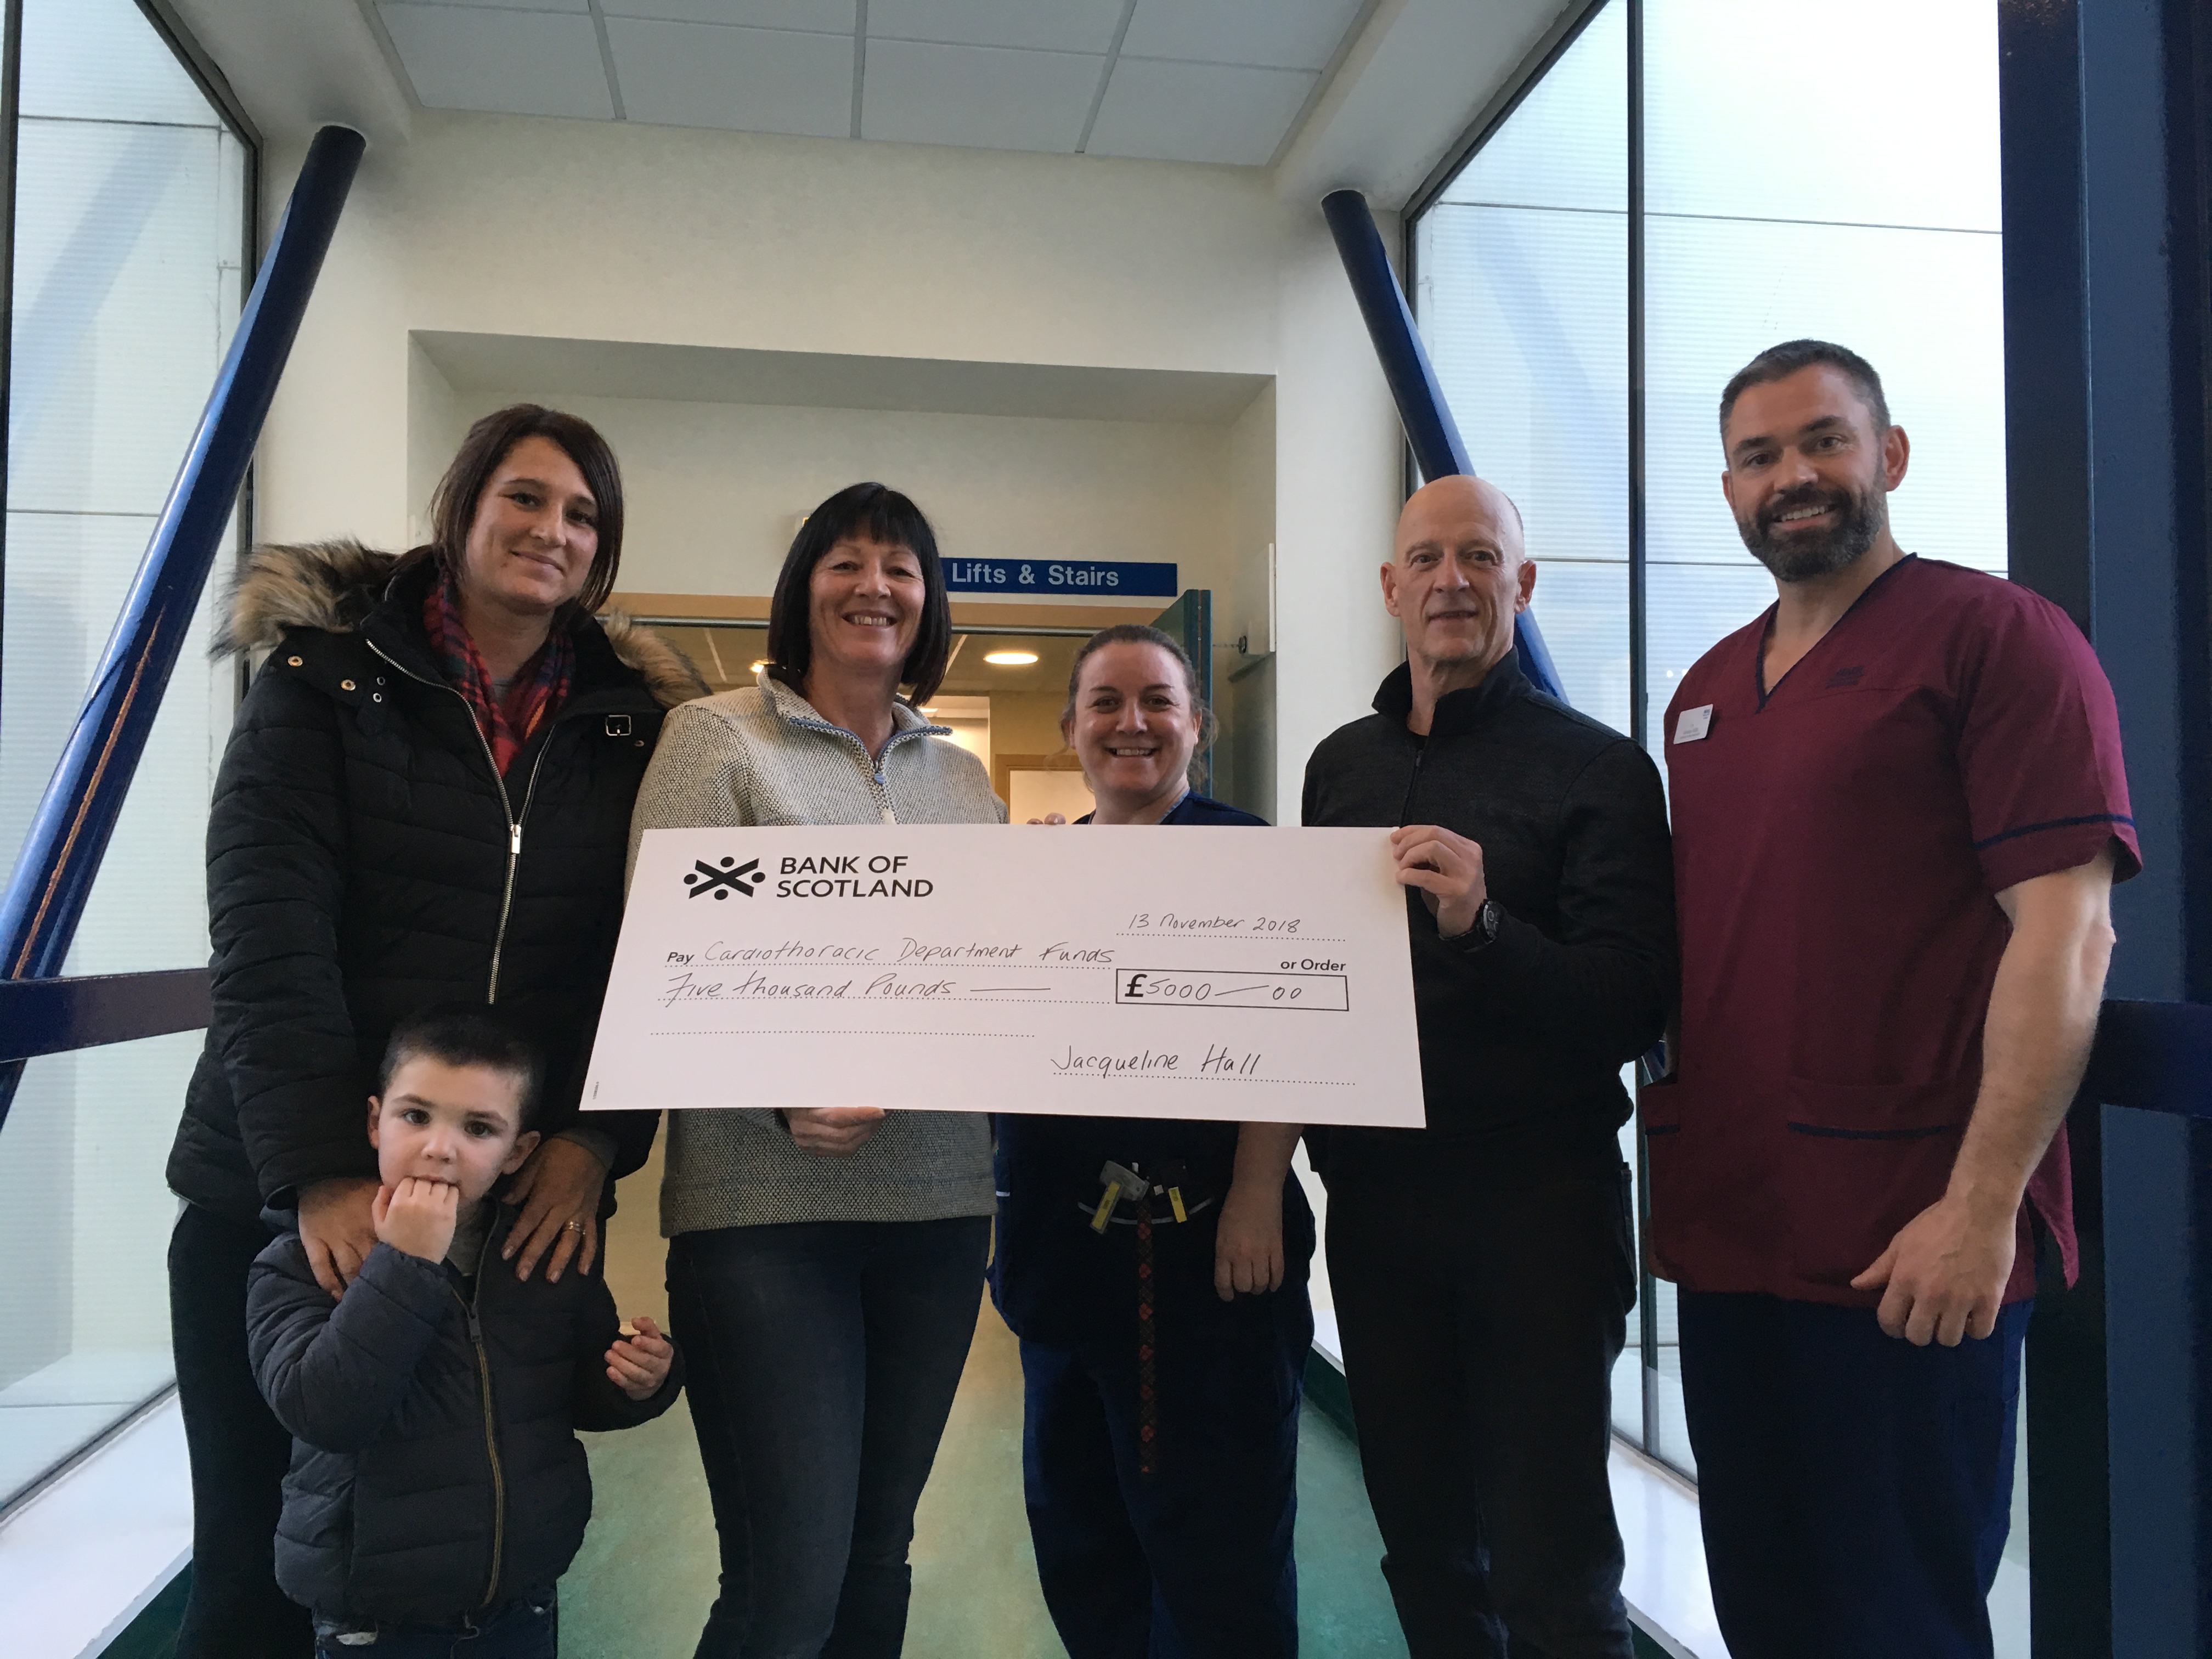 Jackie Hall raised £5,000 for Edinburgh Royal Infirmary in memory of her father. Pictured: Laura Mulholland, Jackie’s daughter, Jack Mulholland, Laura’s son, Jackie Hall, senior charge nurse Jo Stewart,  Jackie's partner Alan Finlay and clinical nurse manager Gordon Mills.